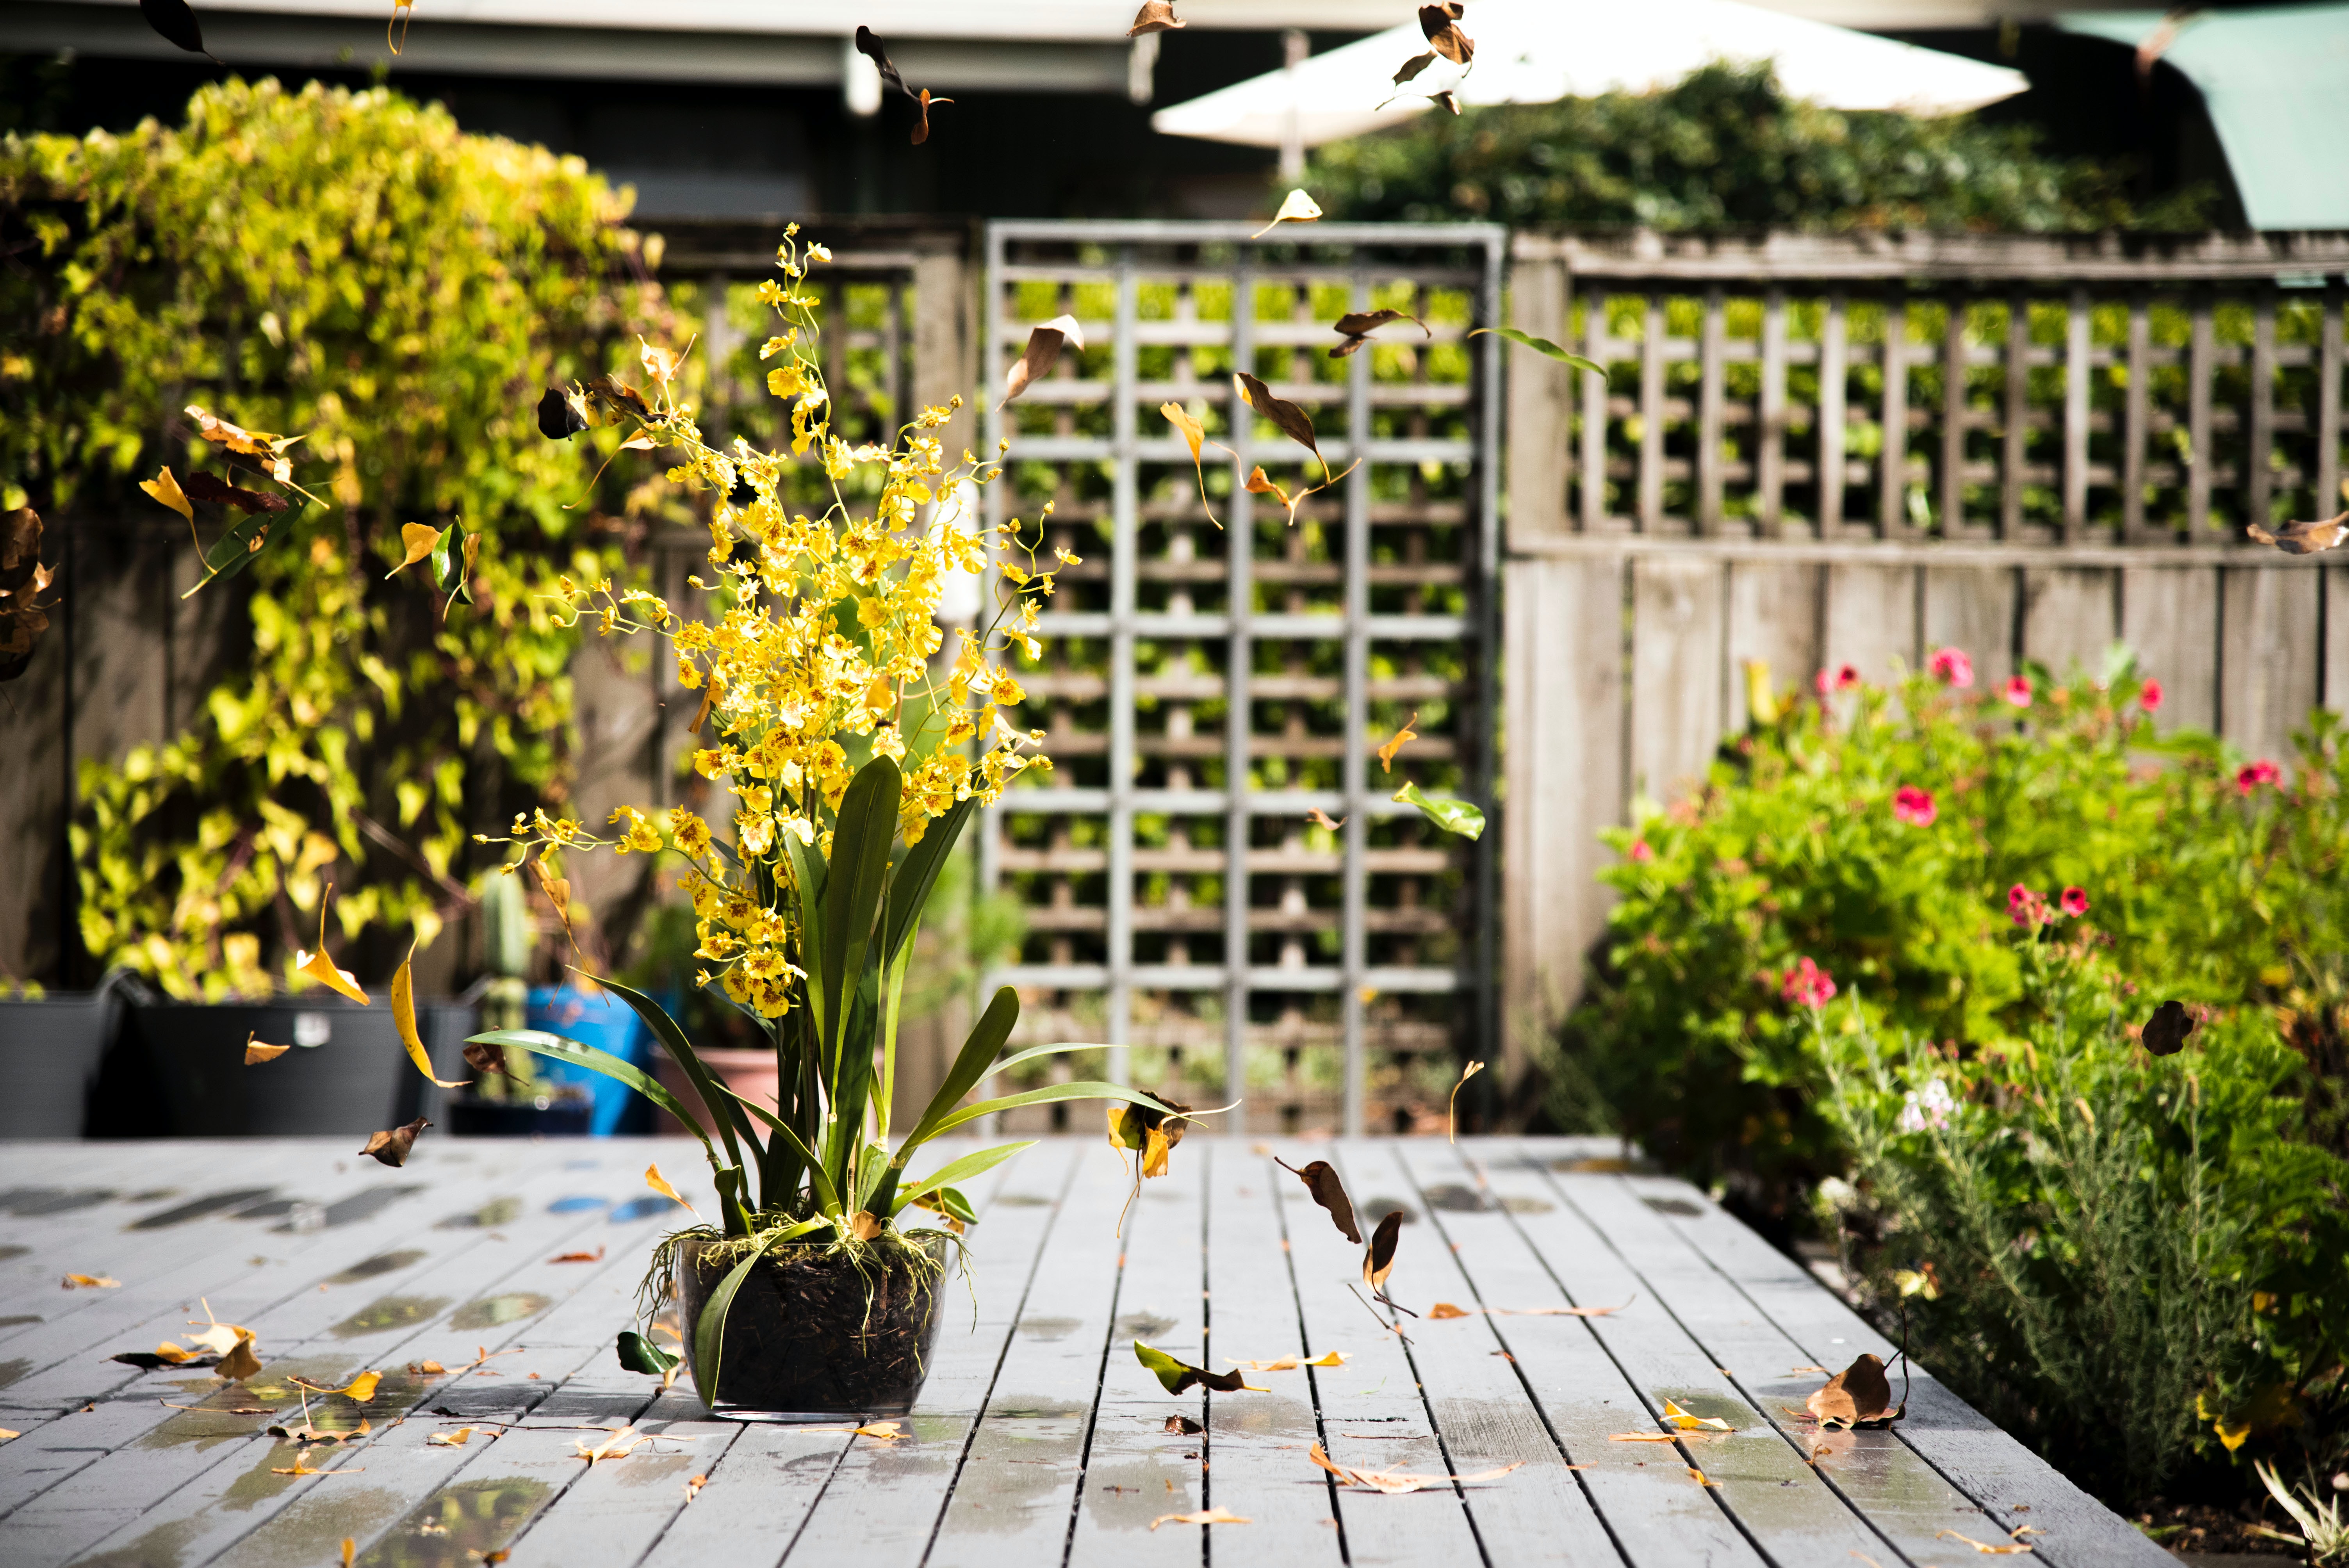 8-Ways-Landscaping-can-Improve-Your-Home